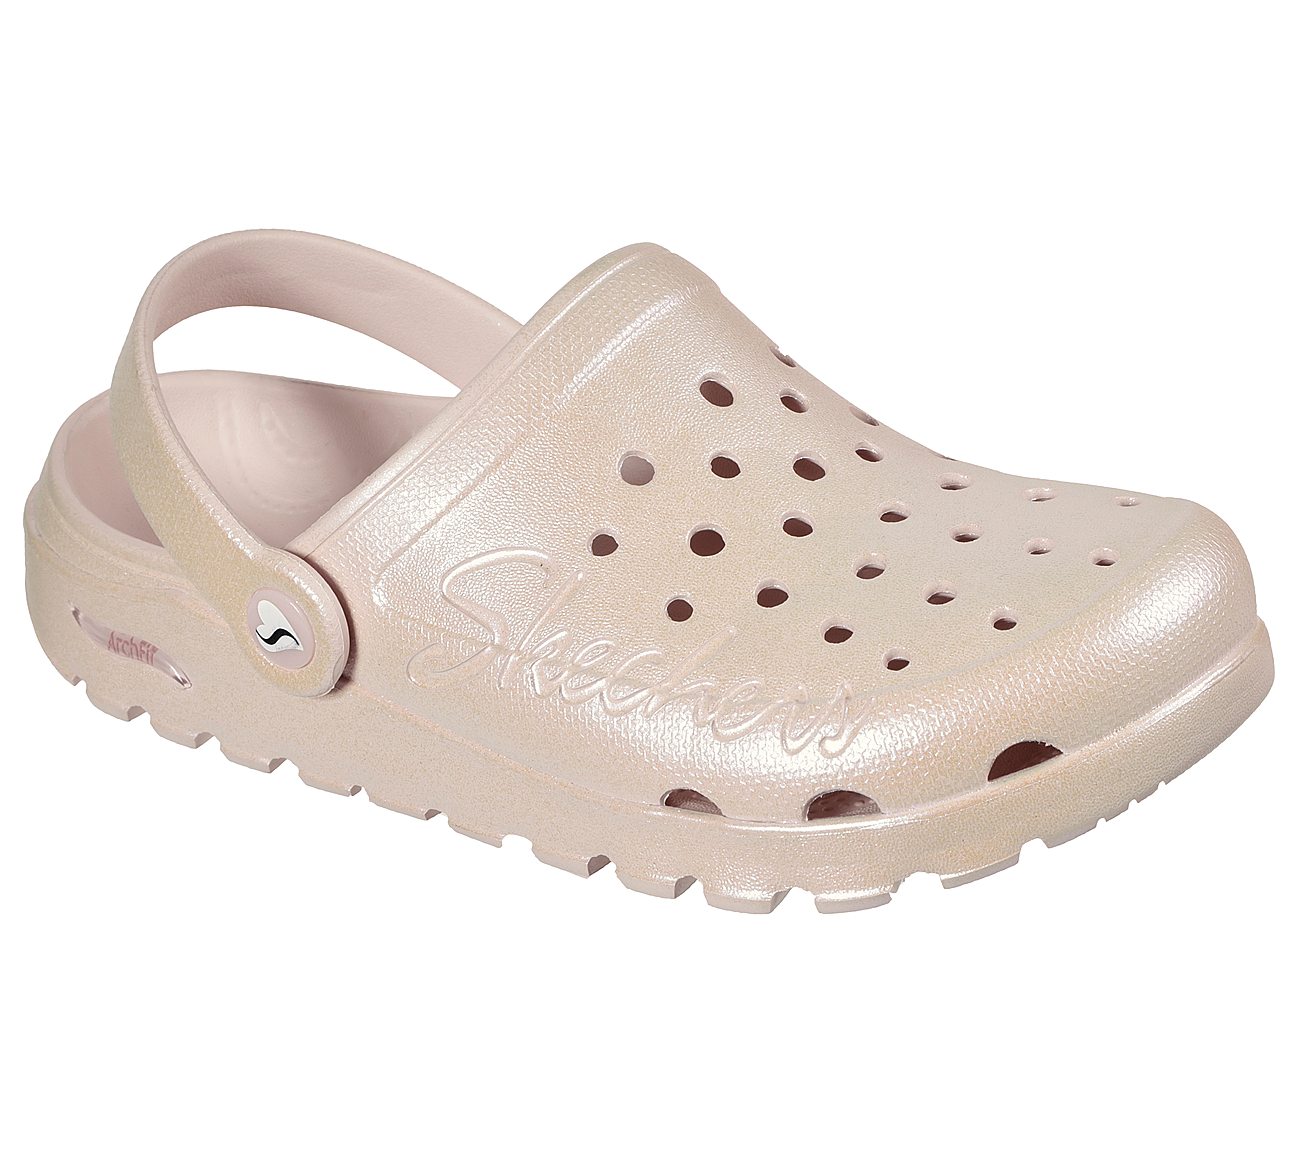 ARCH FIT FOOTSTEPS-PIXIE DUST, LLLIGHT PINK Footwear Right View